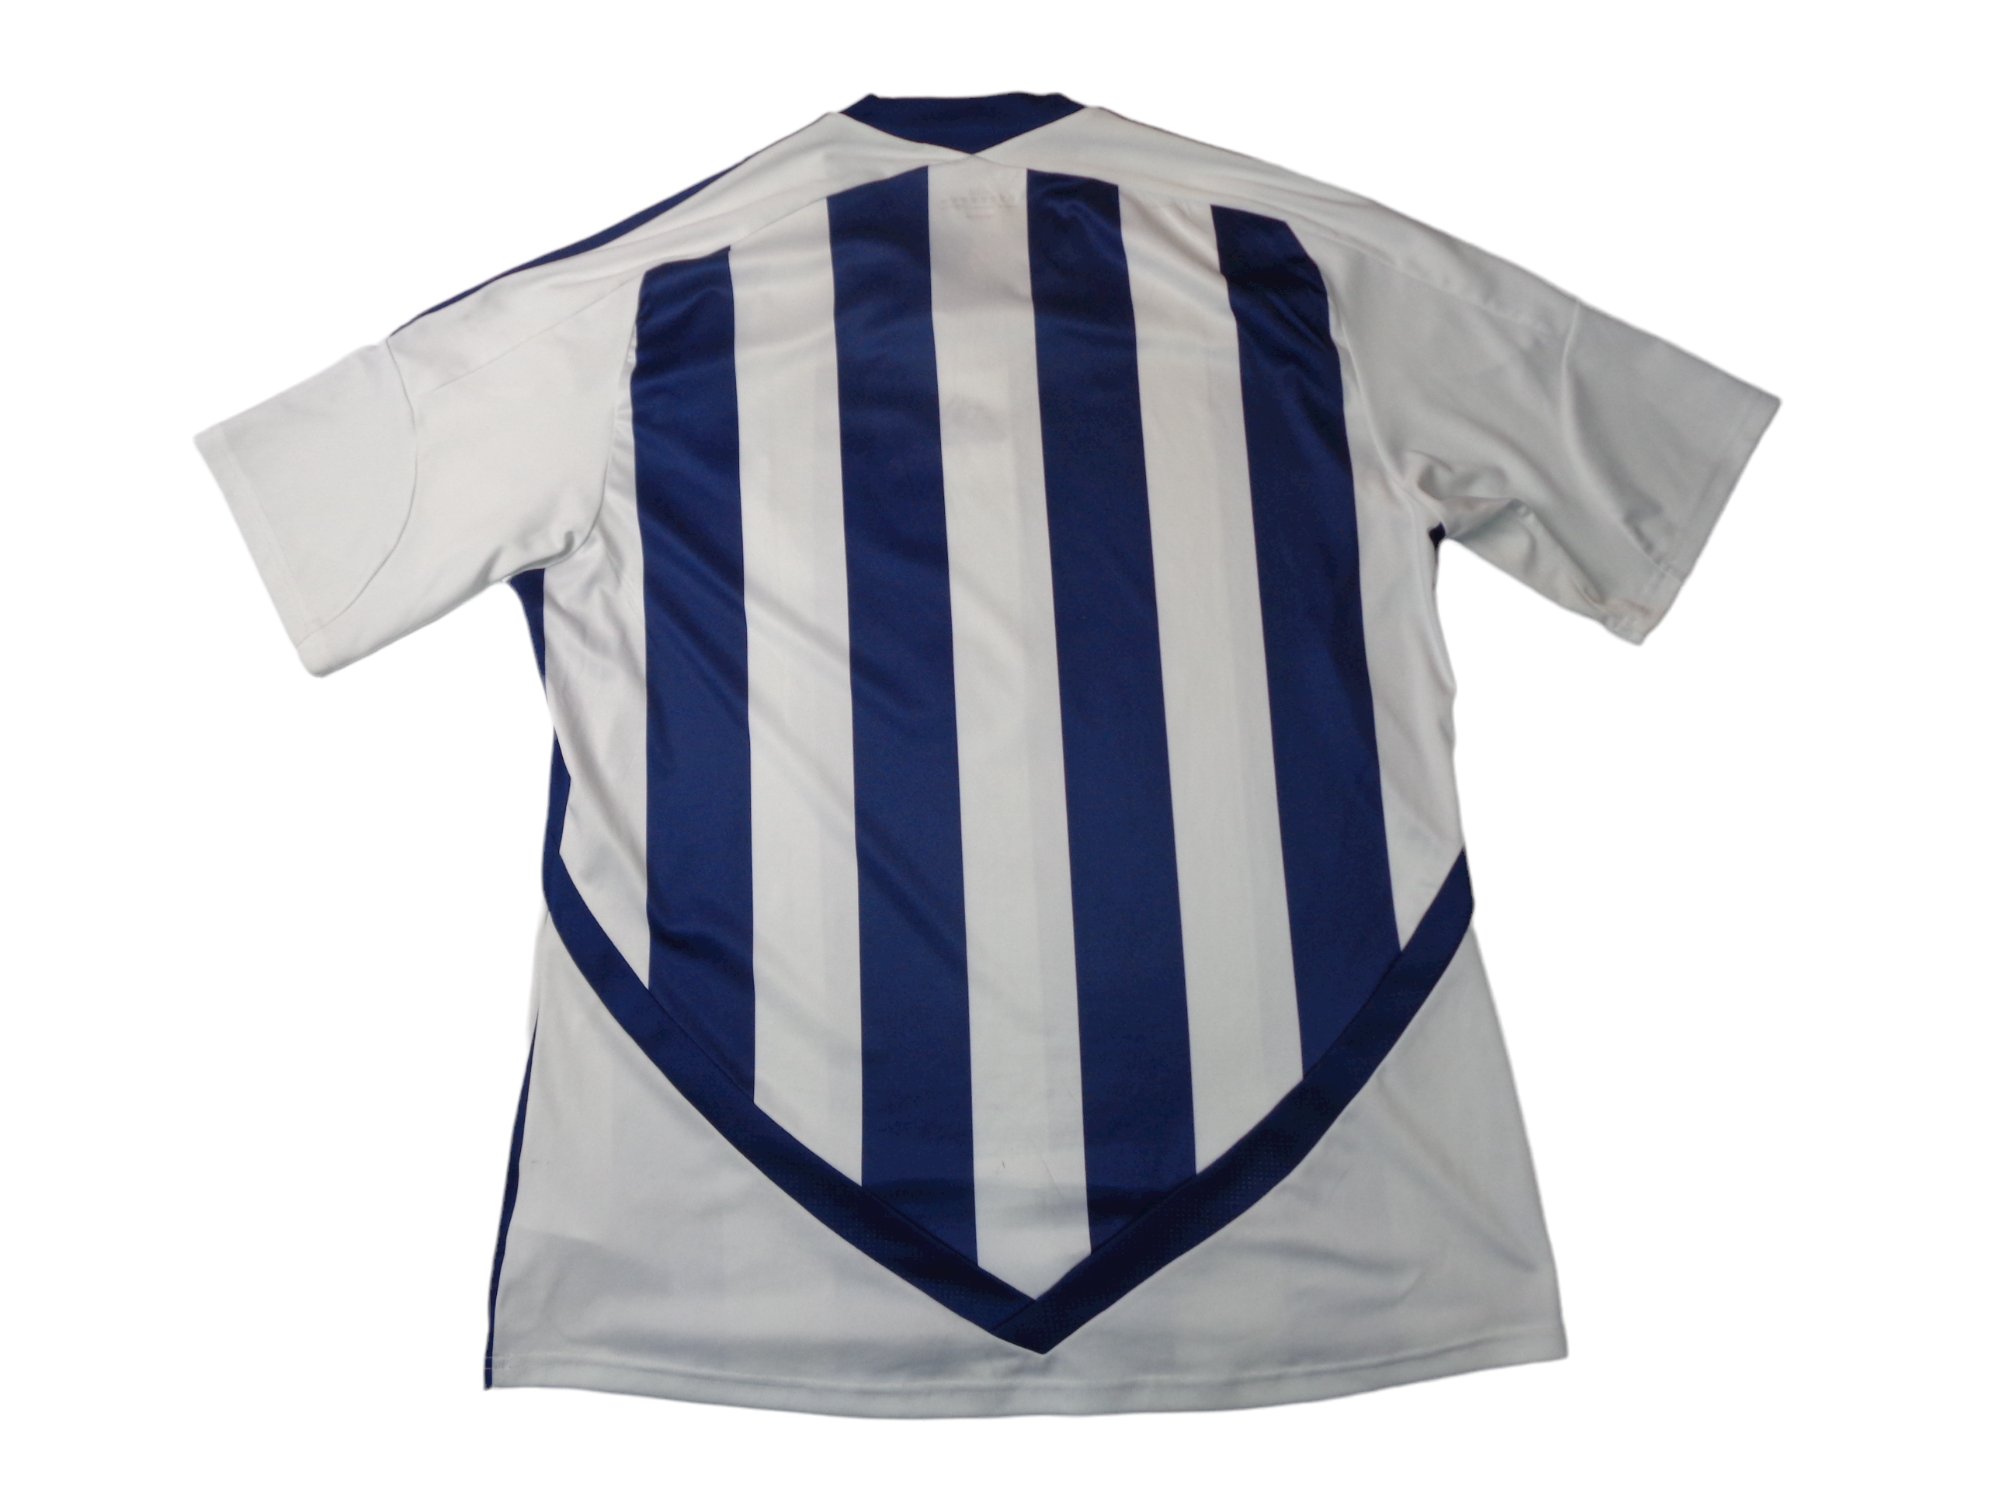 WEST BROMWICH ALBION 2011/12 HOME SHIRT - ADIDAS - SIZE XL